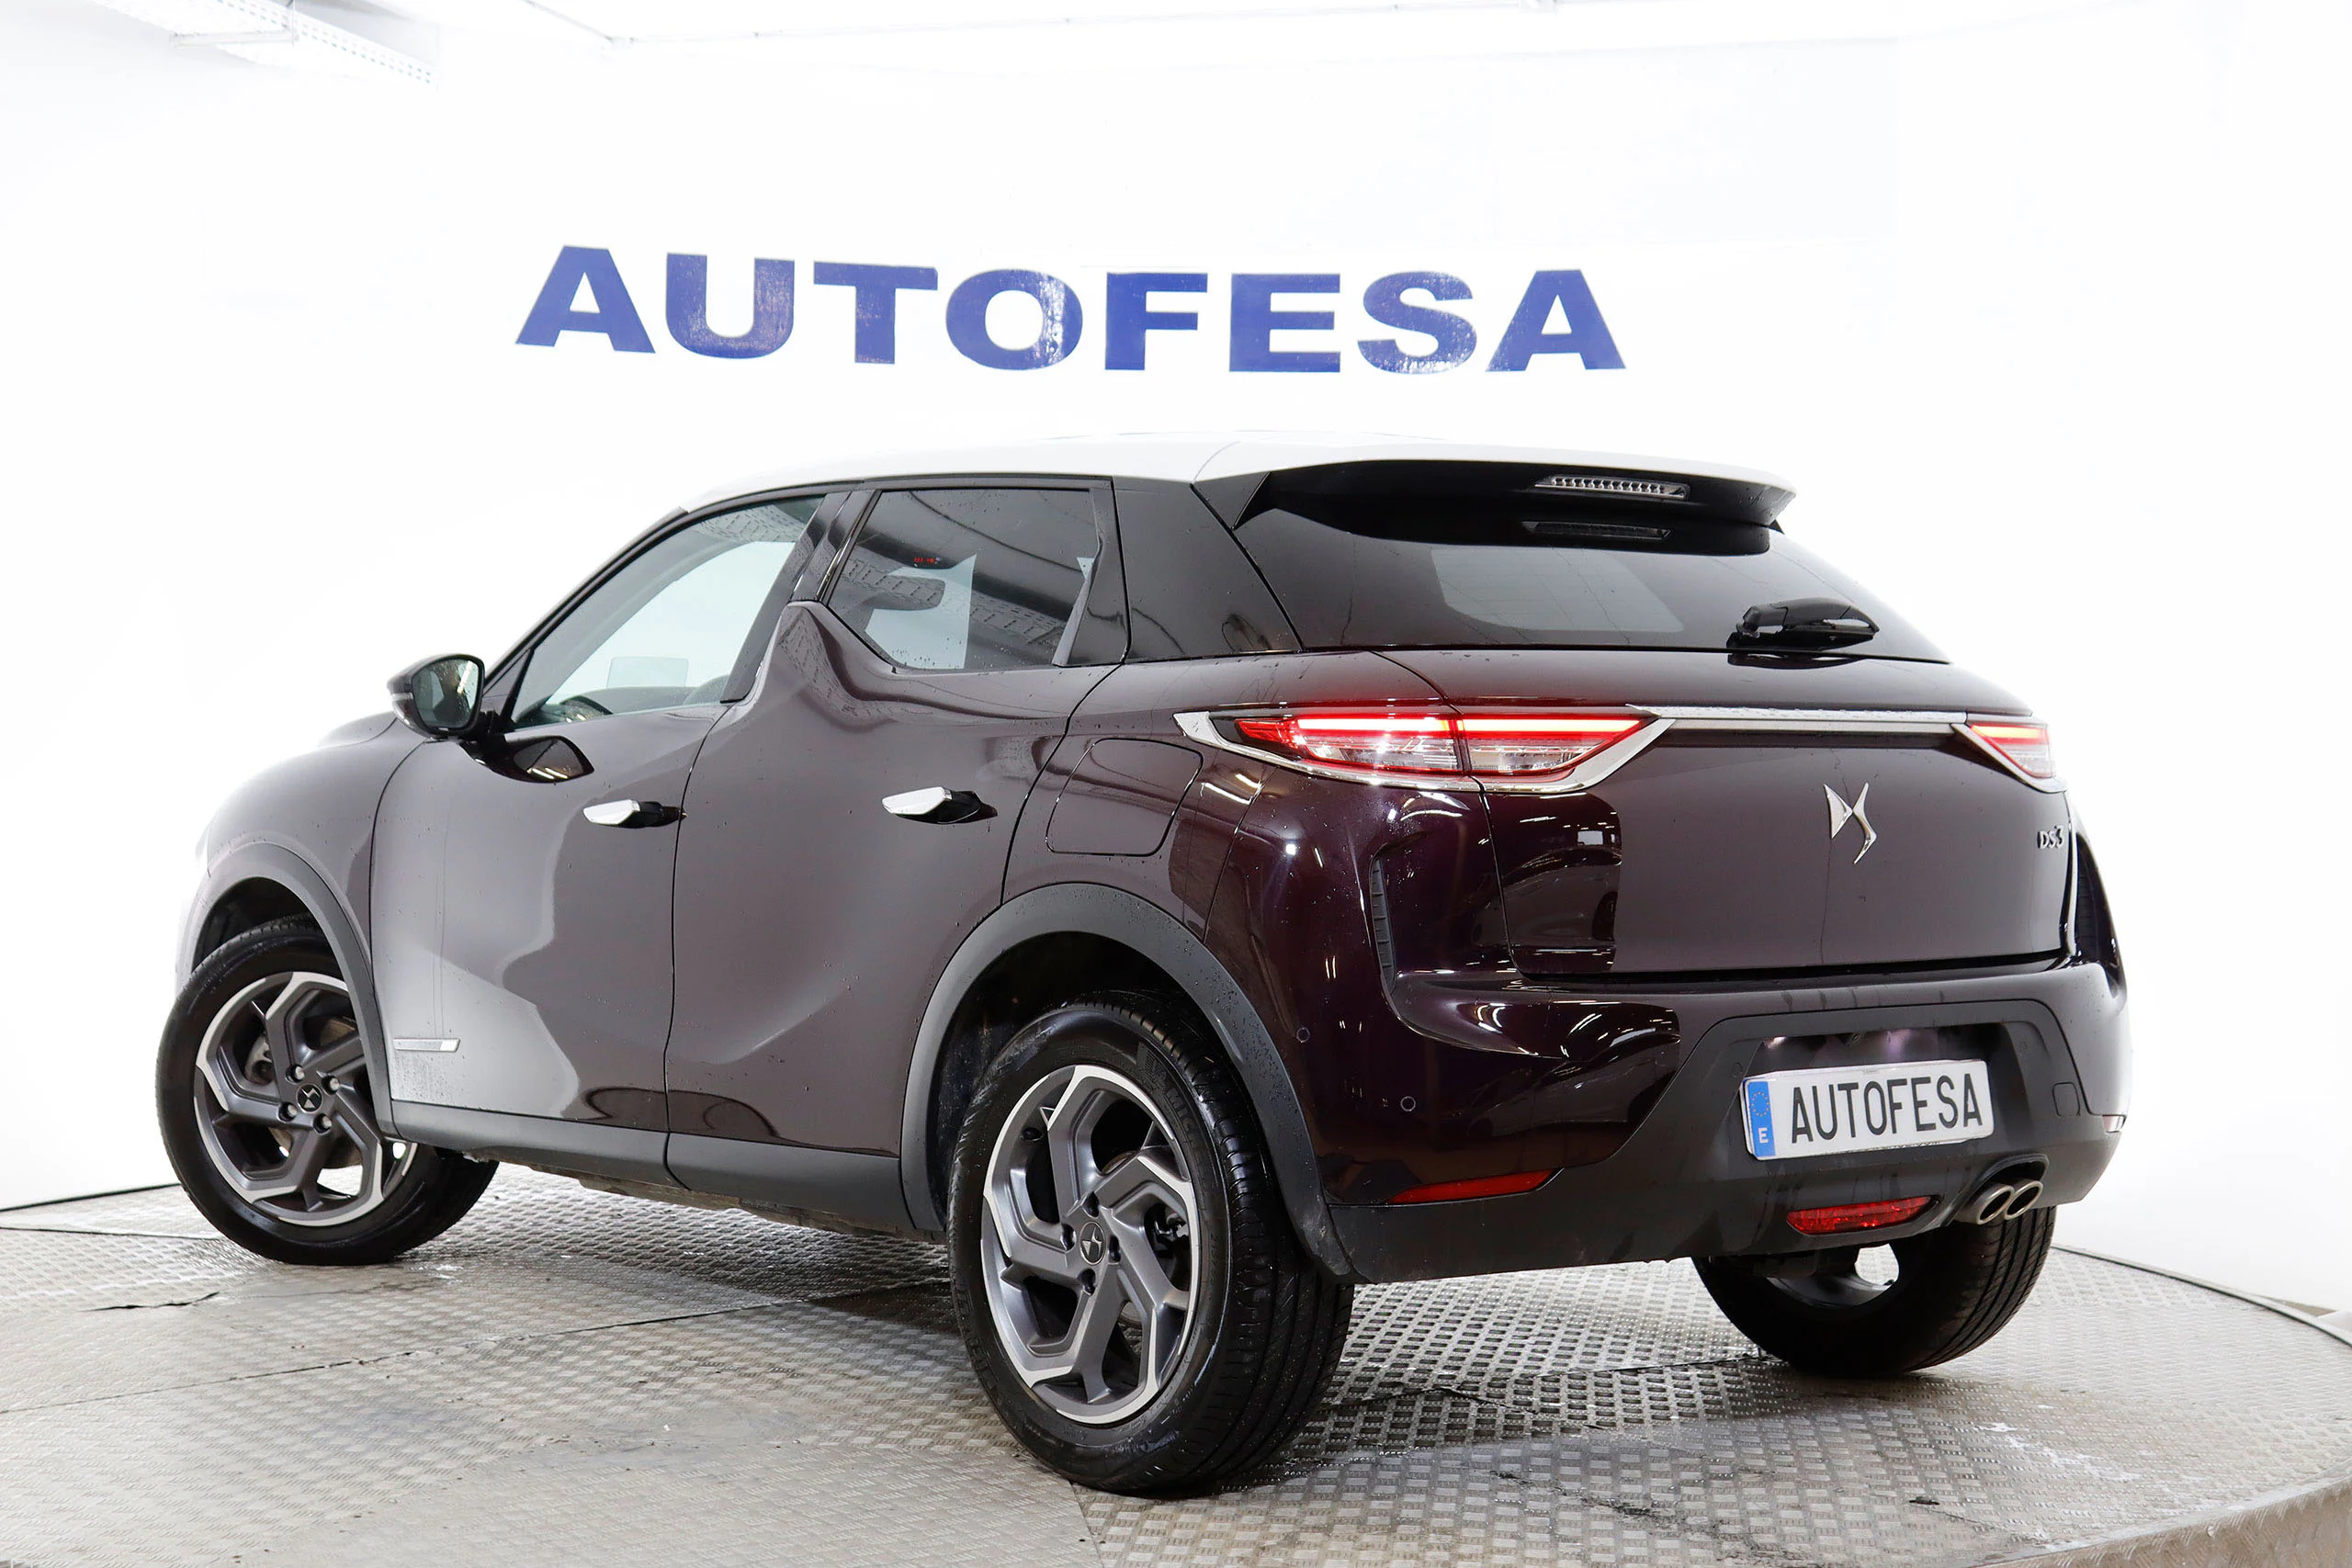 DS DS 3 Crossback 1.2 Grand Chic 130cv Auto 5P S/S # NAVY, FAROS LED - Foto 9